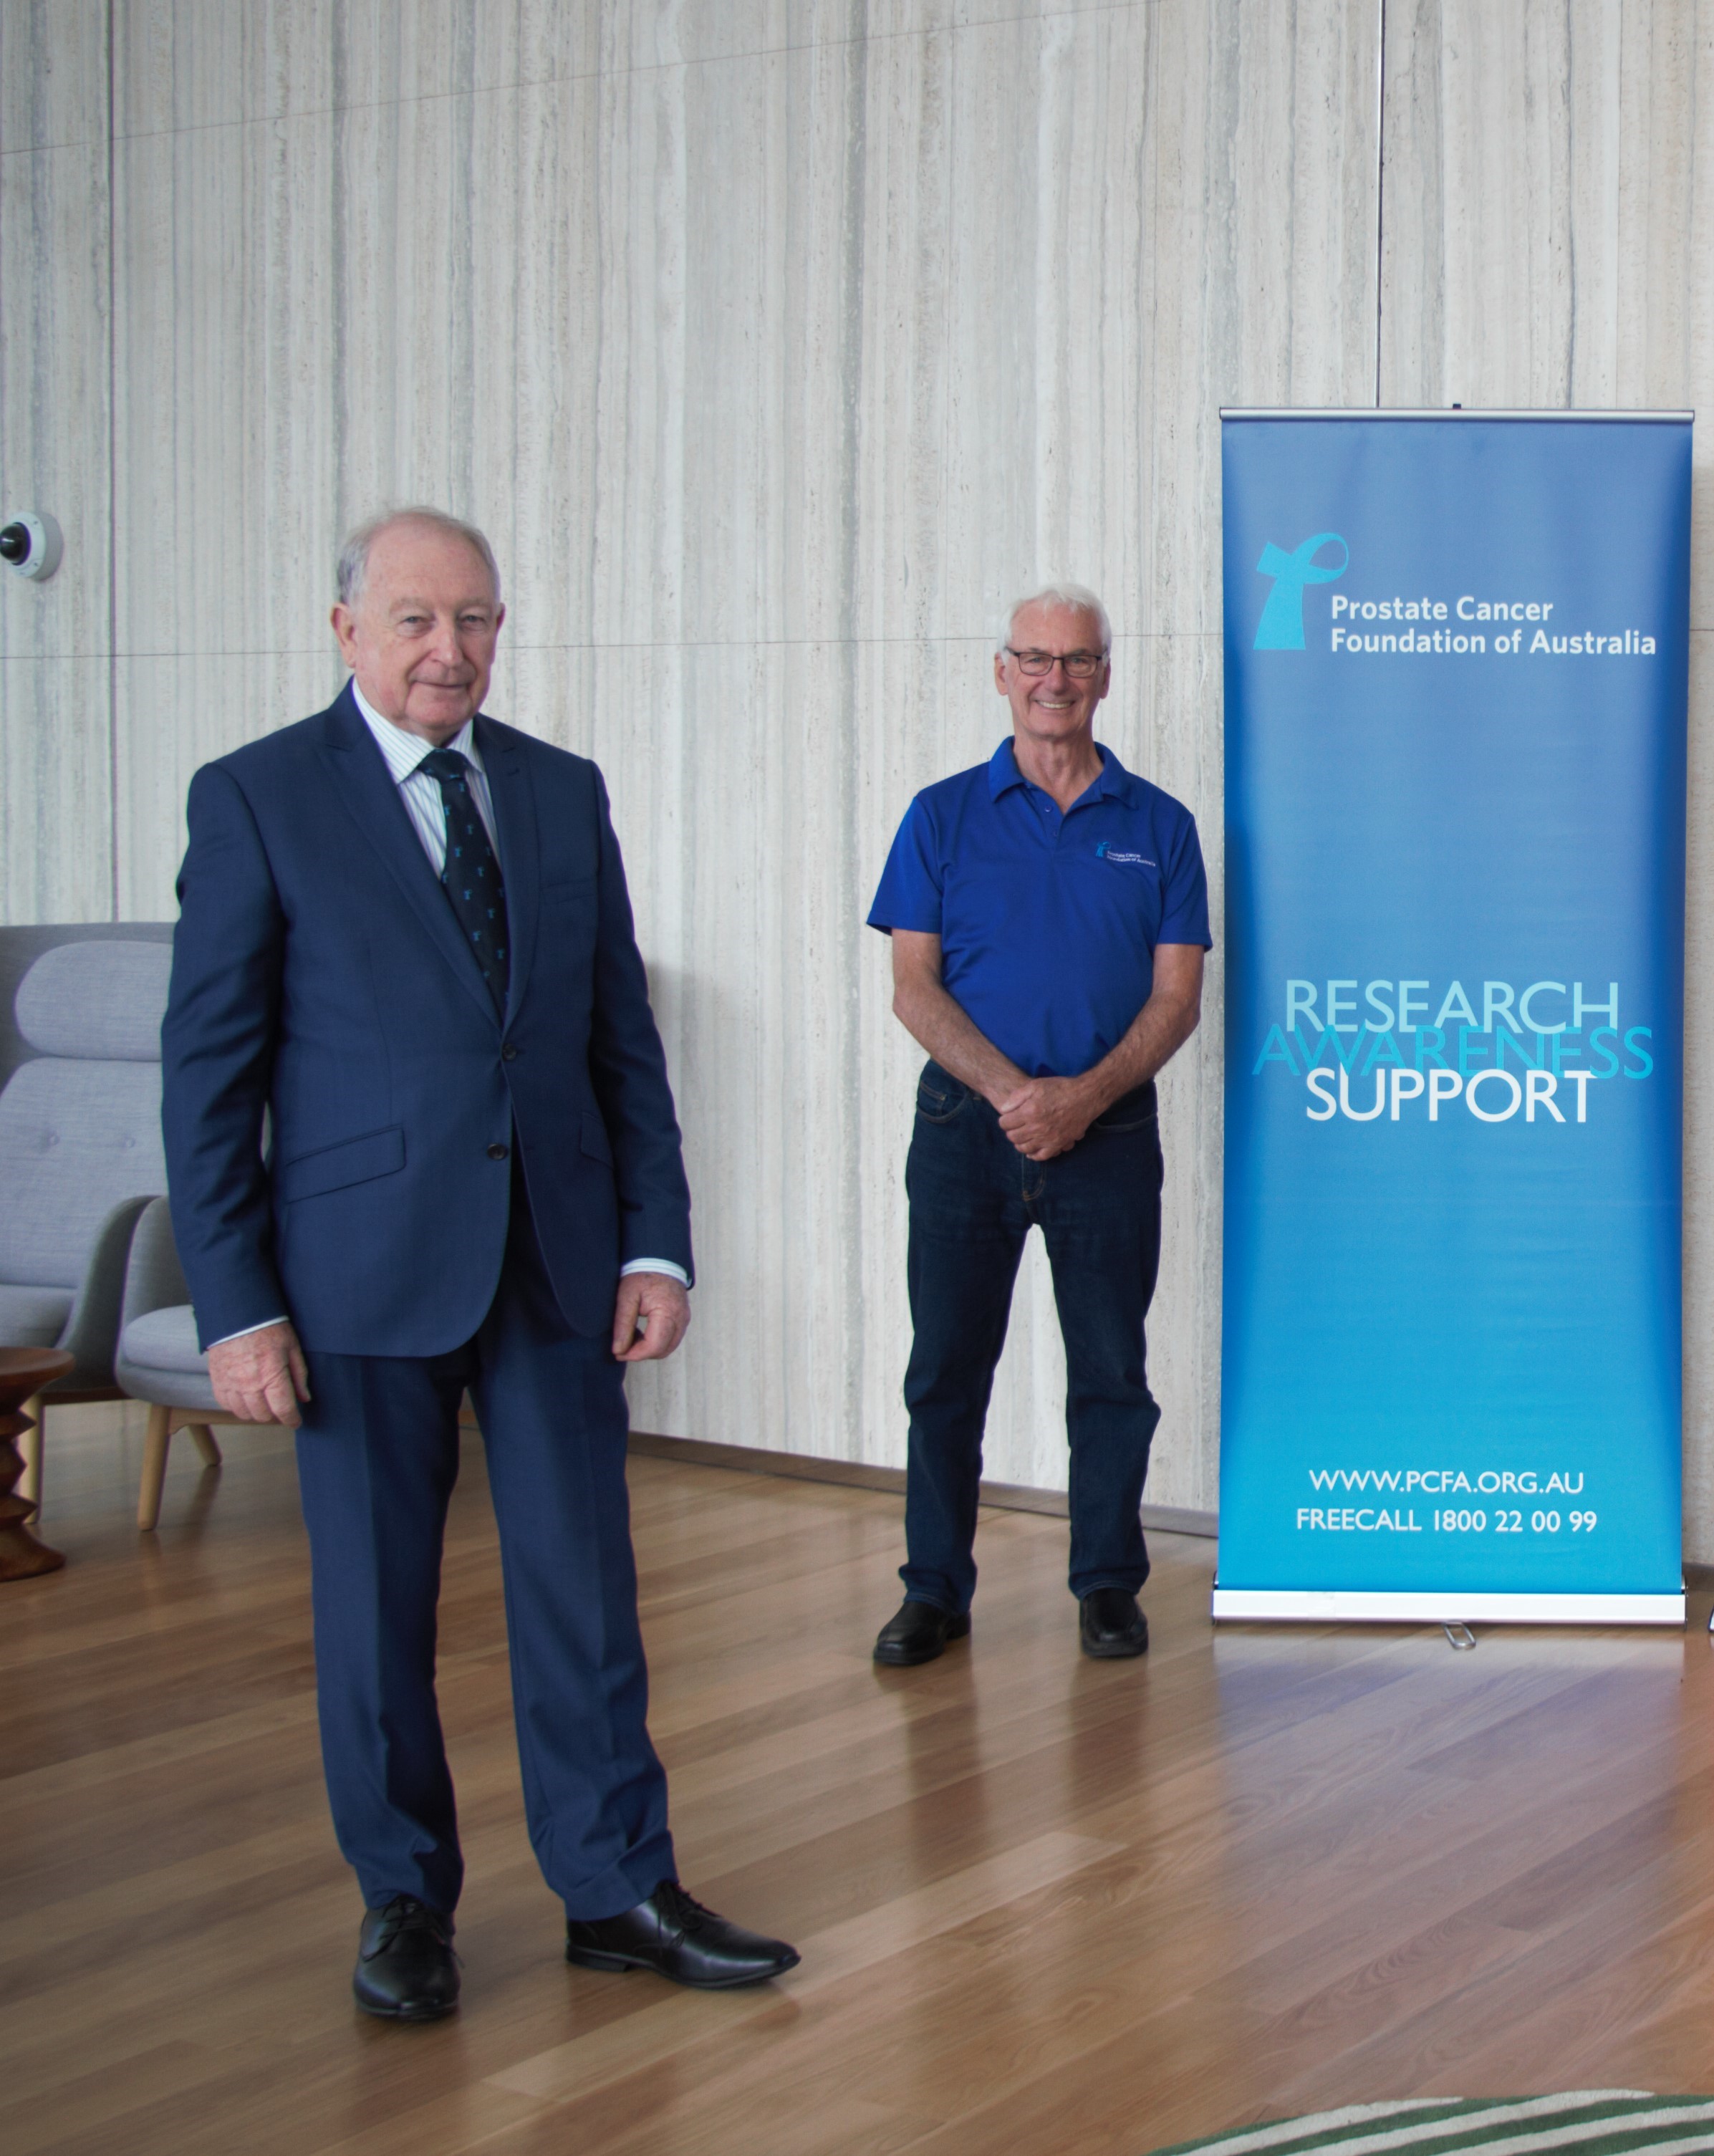 Major parties called to boost support for regional men with prostate cancer